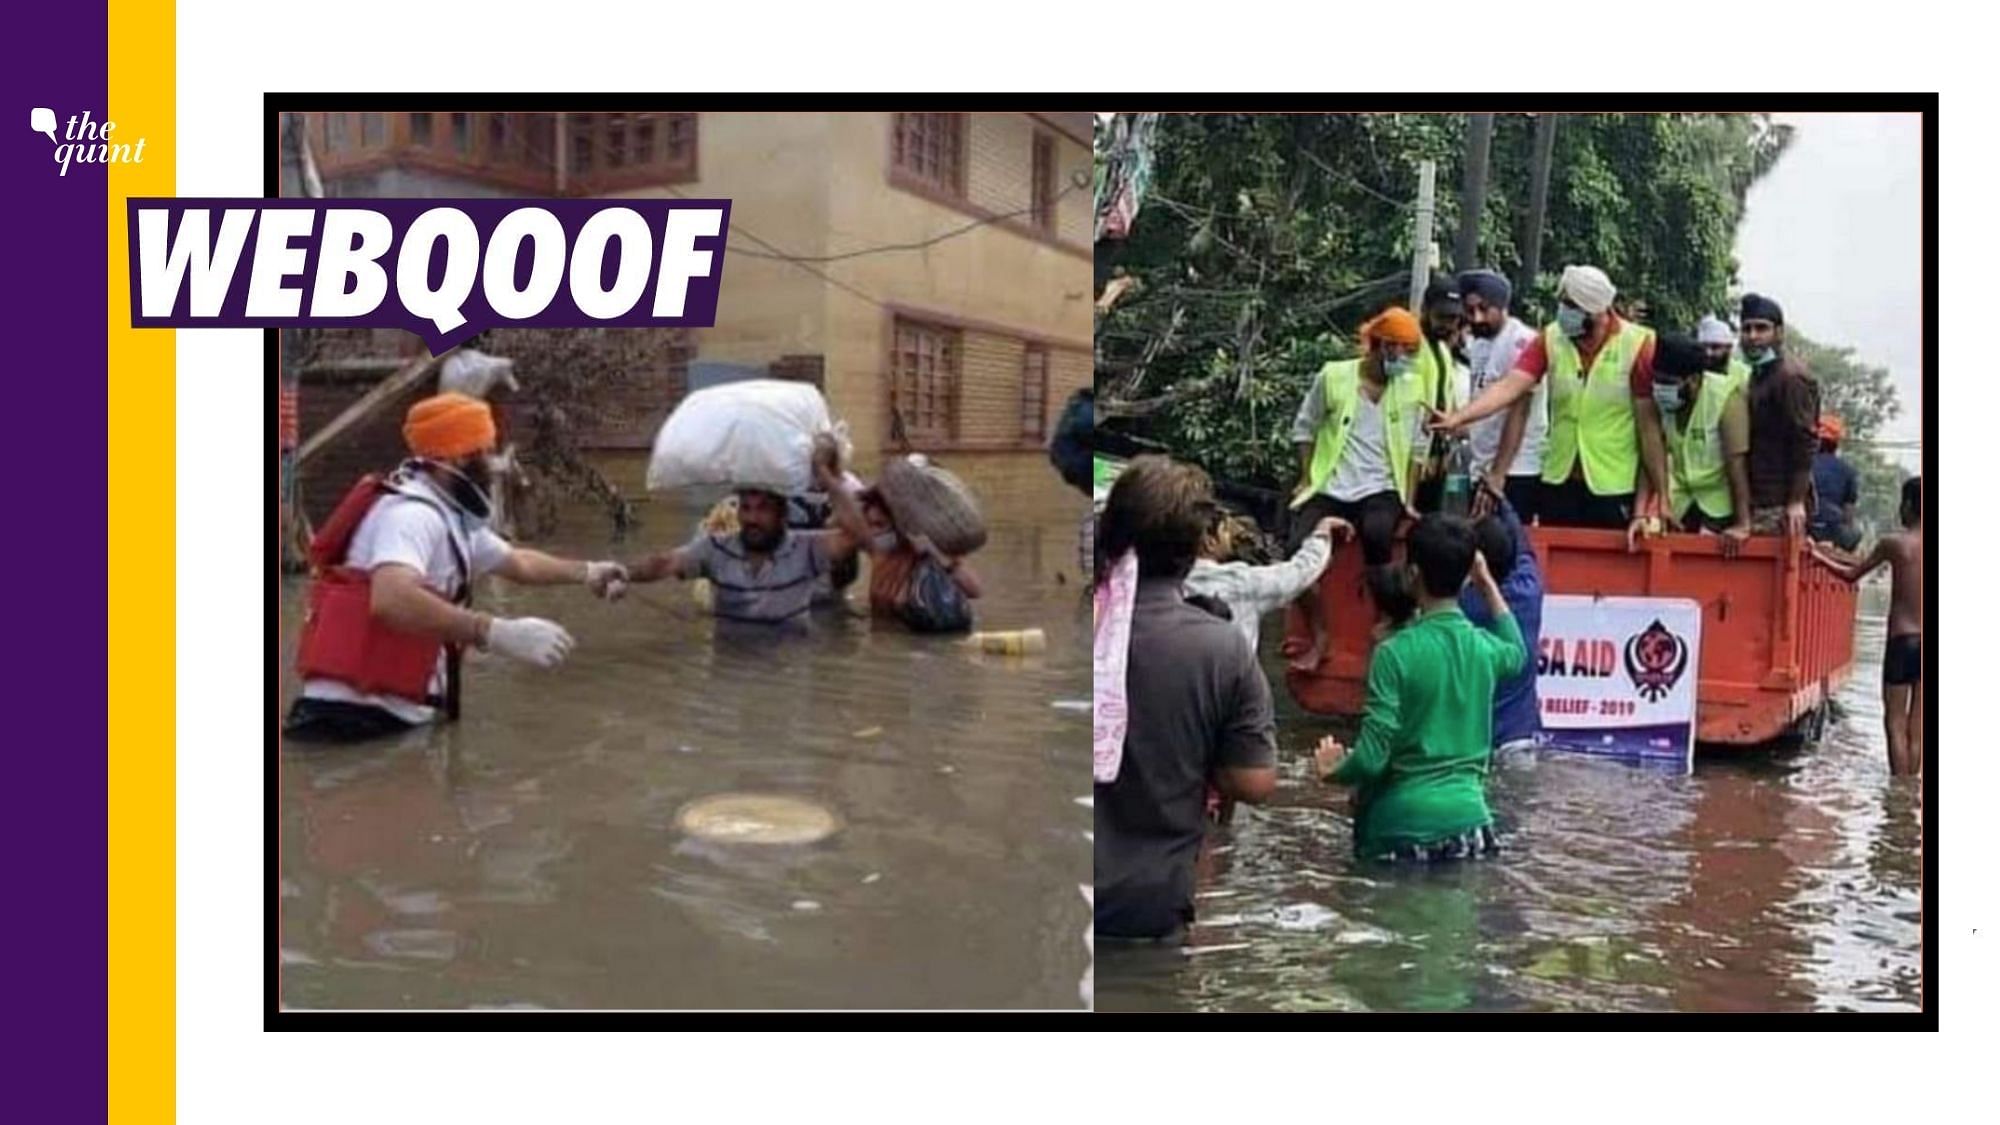  The images in circulation are old and not related to Uttarakhand flash flood tragedy.